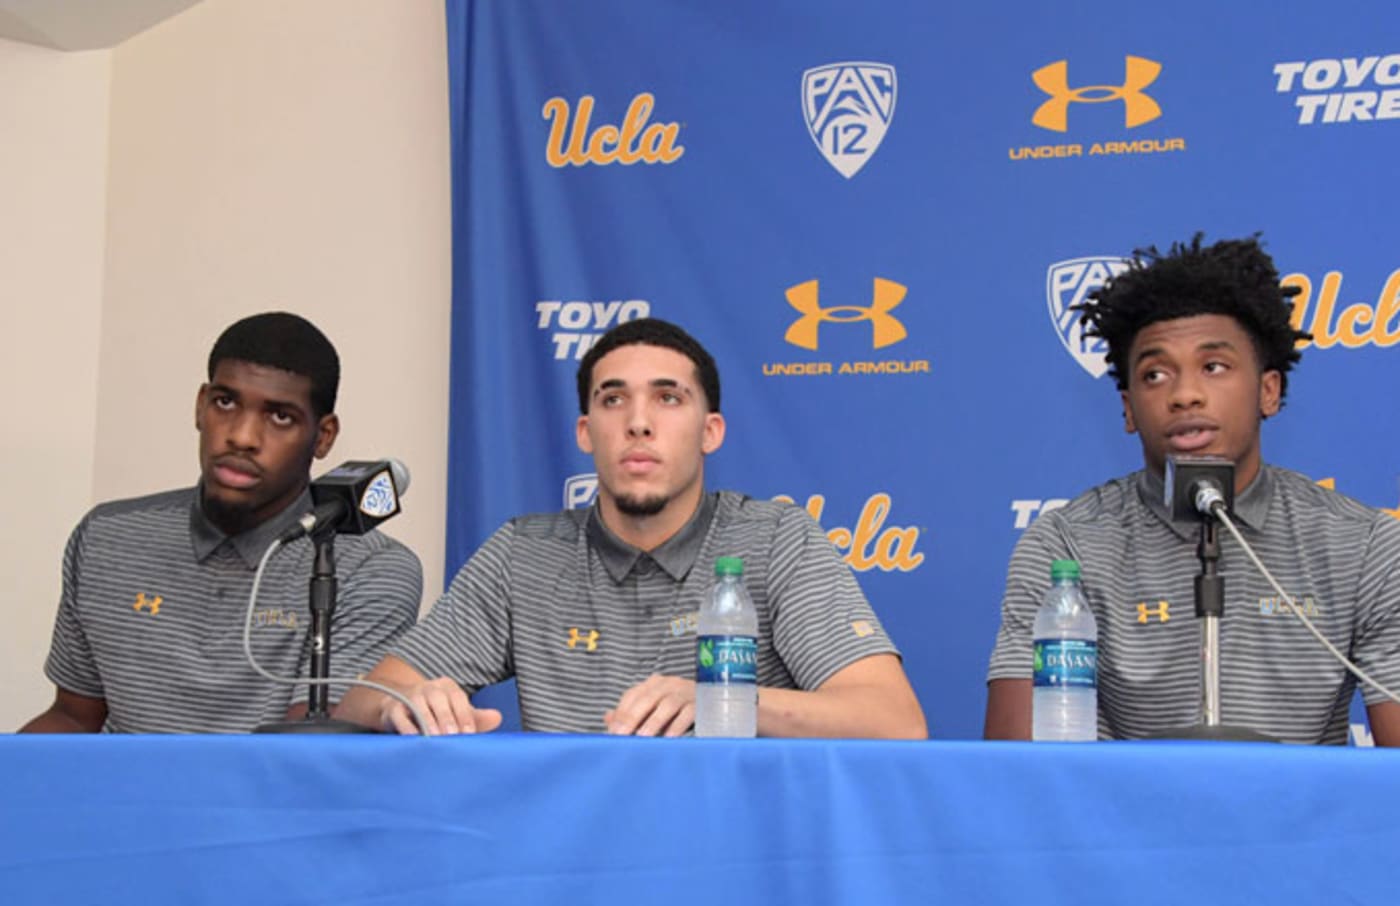 UCLA players Jalen Hill, LiAngelo Ball and Cody Riley apologize during a press conference.